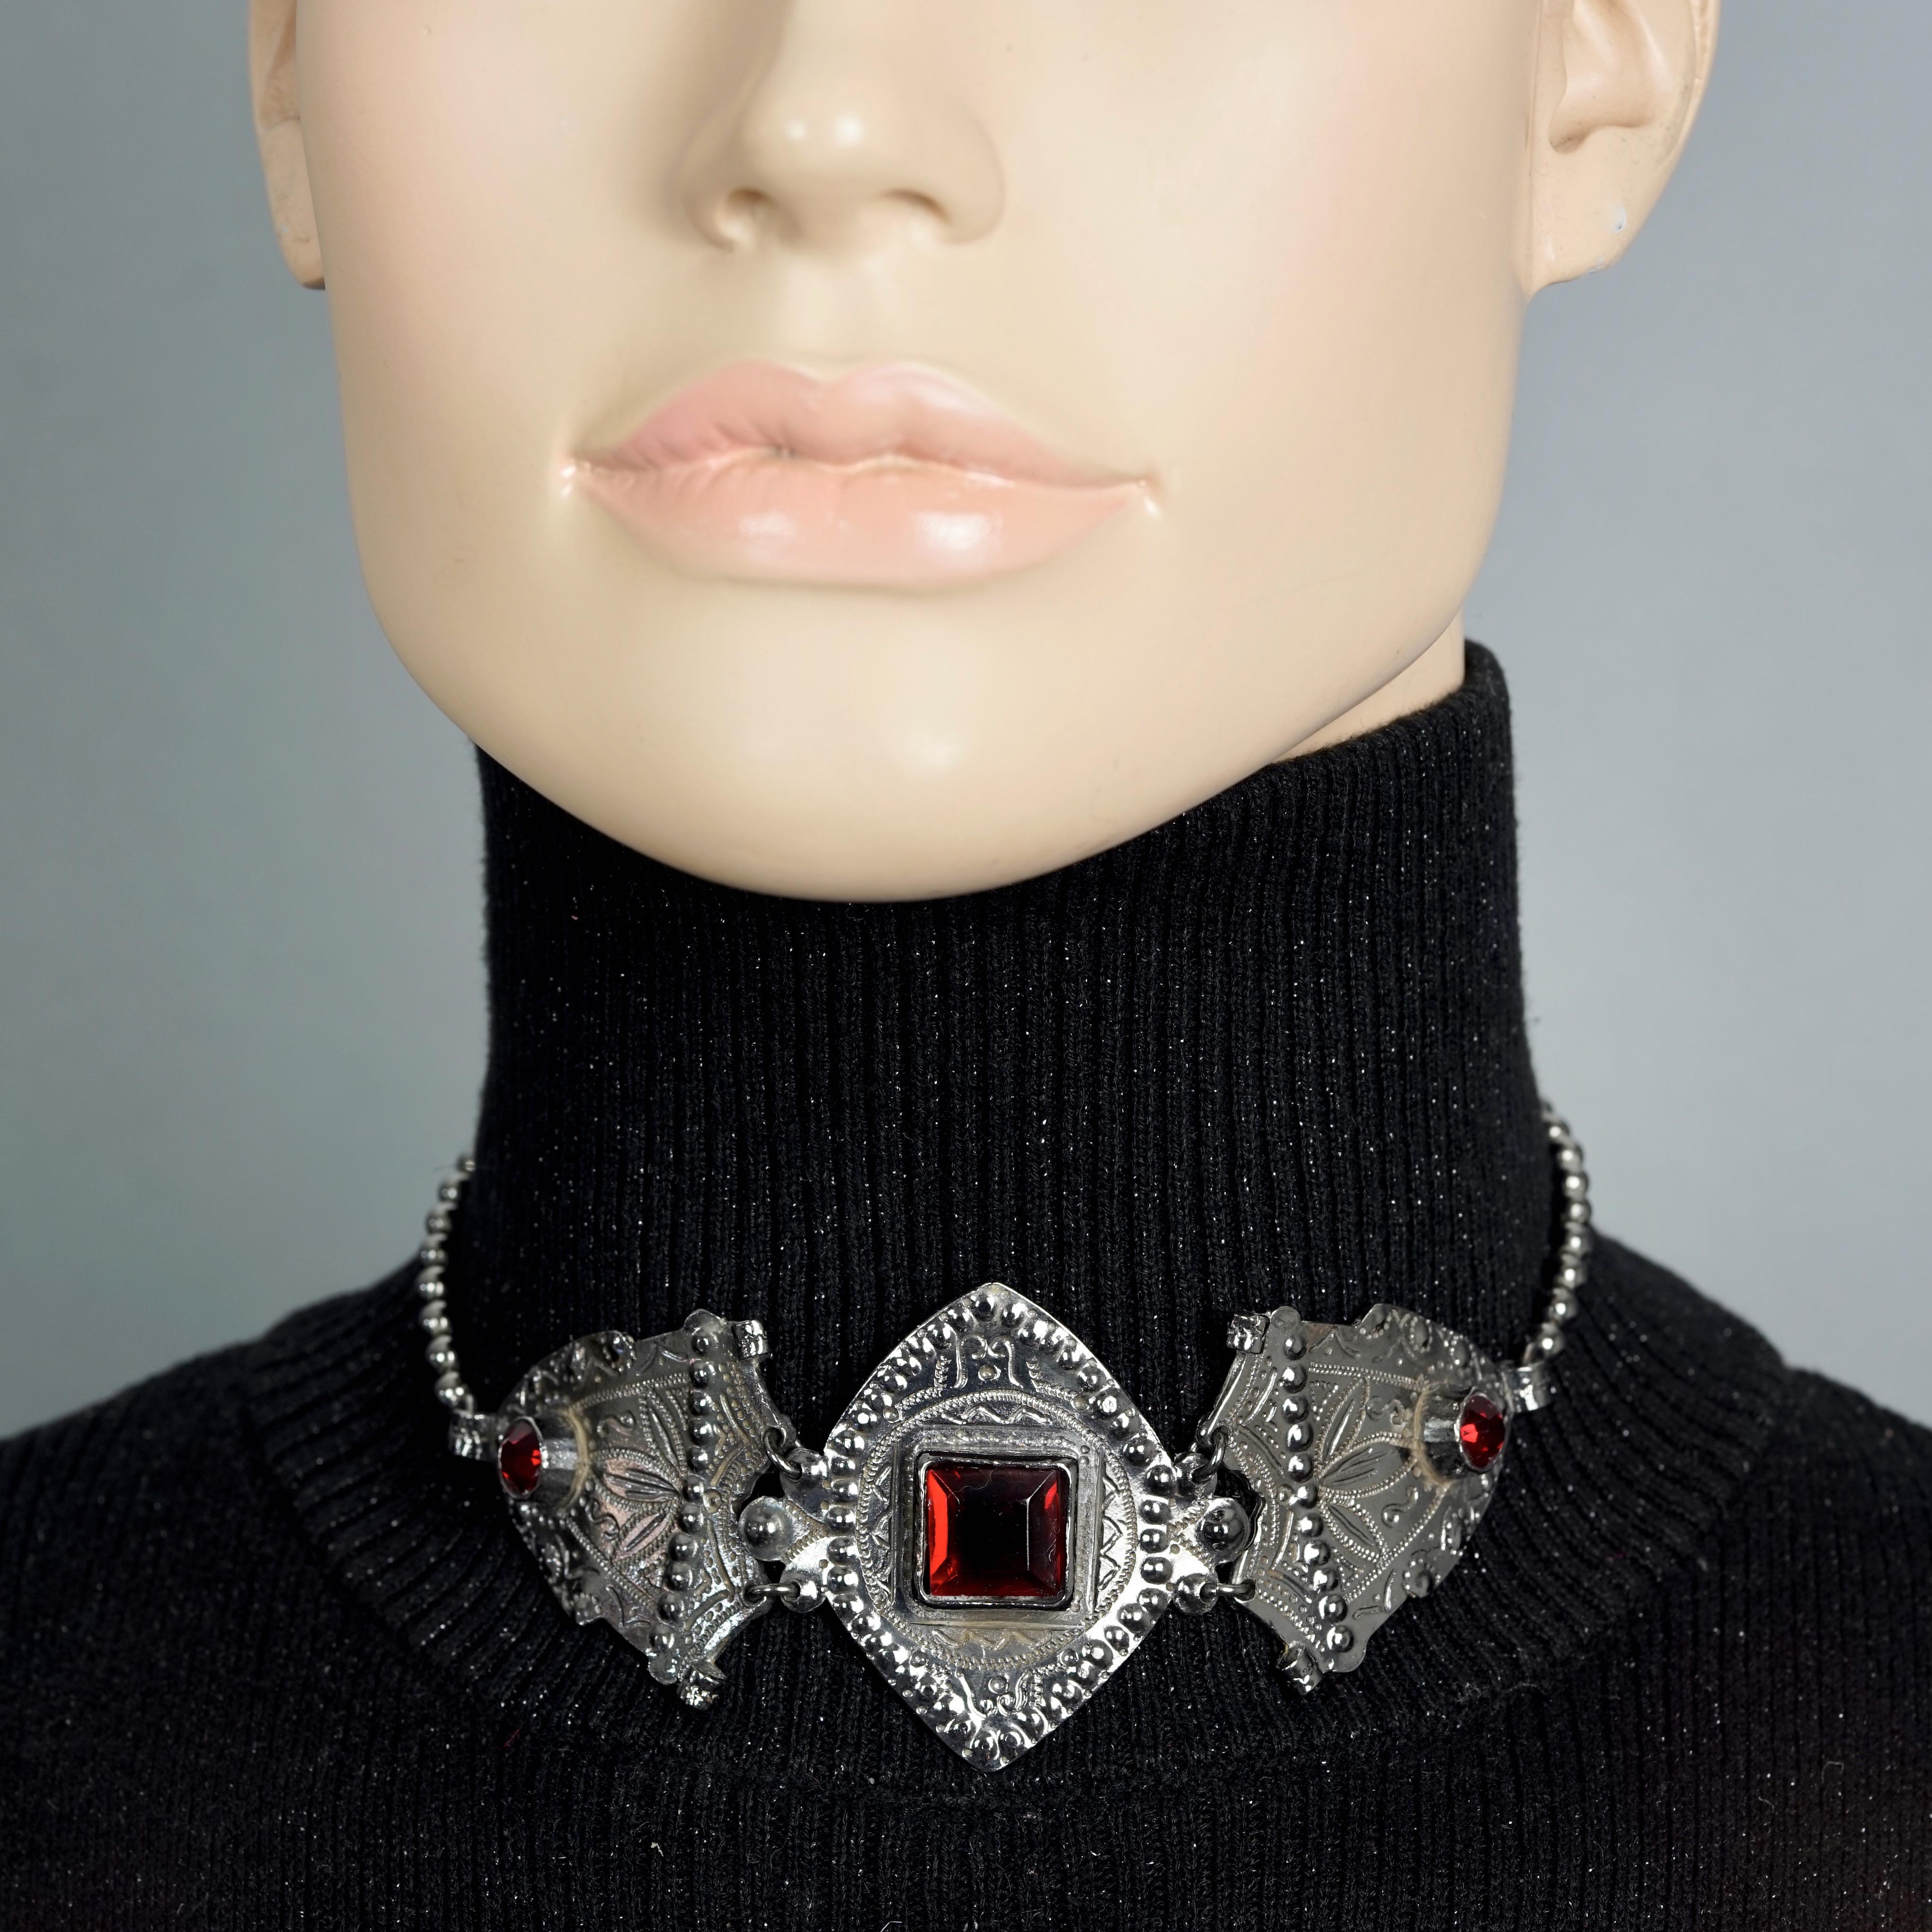 Vintage JEAN PAUL GAULTIER Ethnic Red Stones Choker Necklace

Measurements:
Height: 1.93 inches (4.9 cm)
Wearable Length: 13.18 inches to 15.55 inches (33.5 cm to 39.5 cm)

Features:
- 100% Authentic JEAN PAUL GAULTIER.
- Ethnic inspired choker